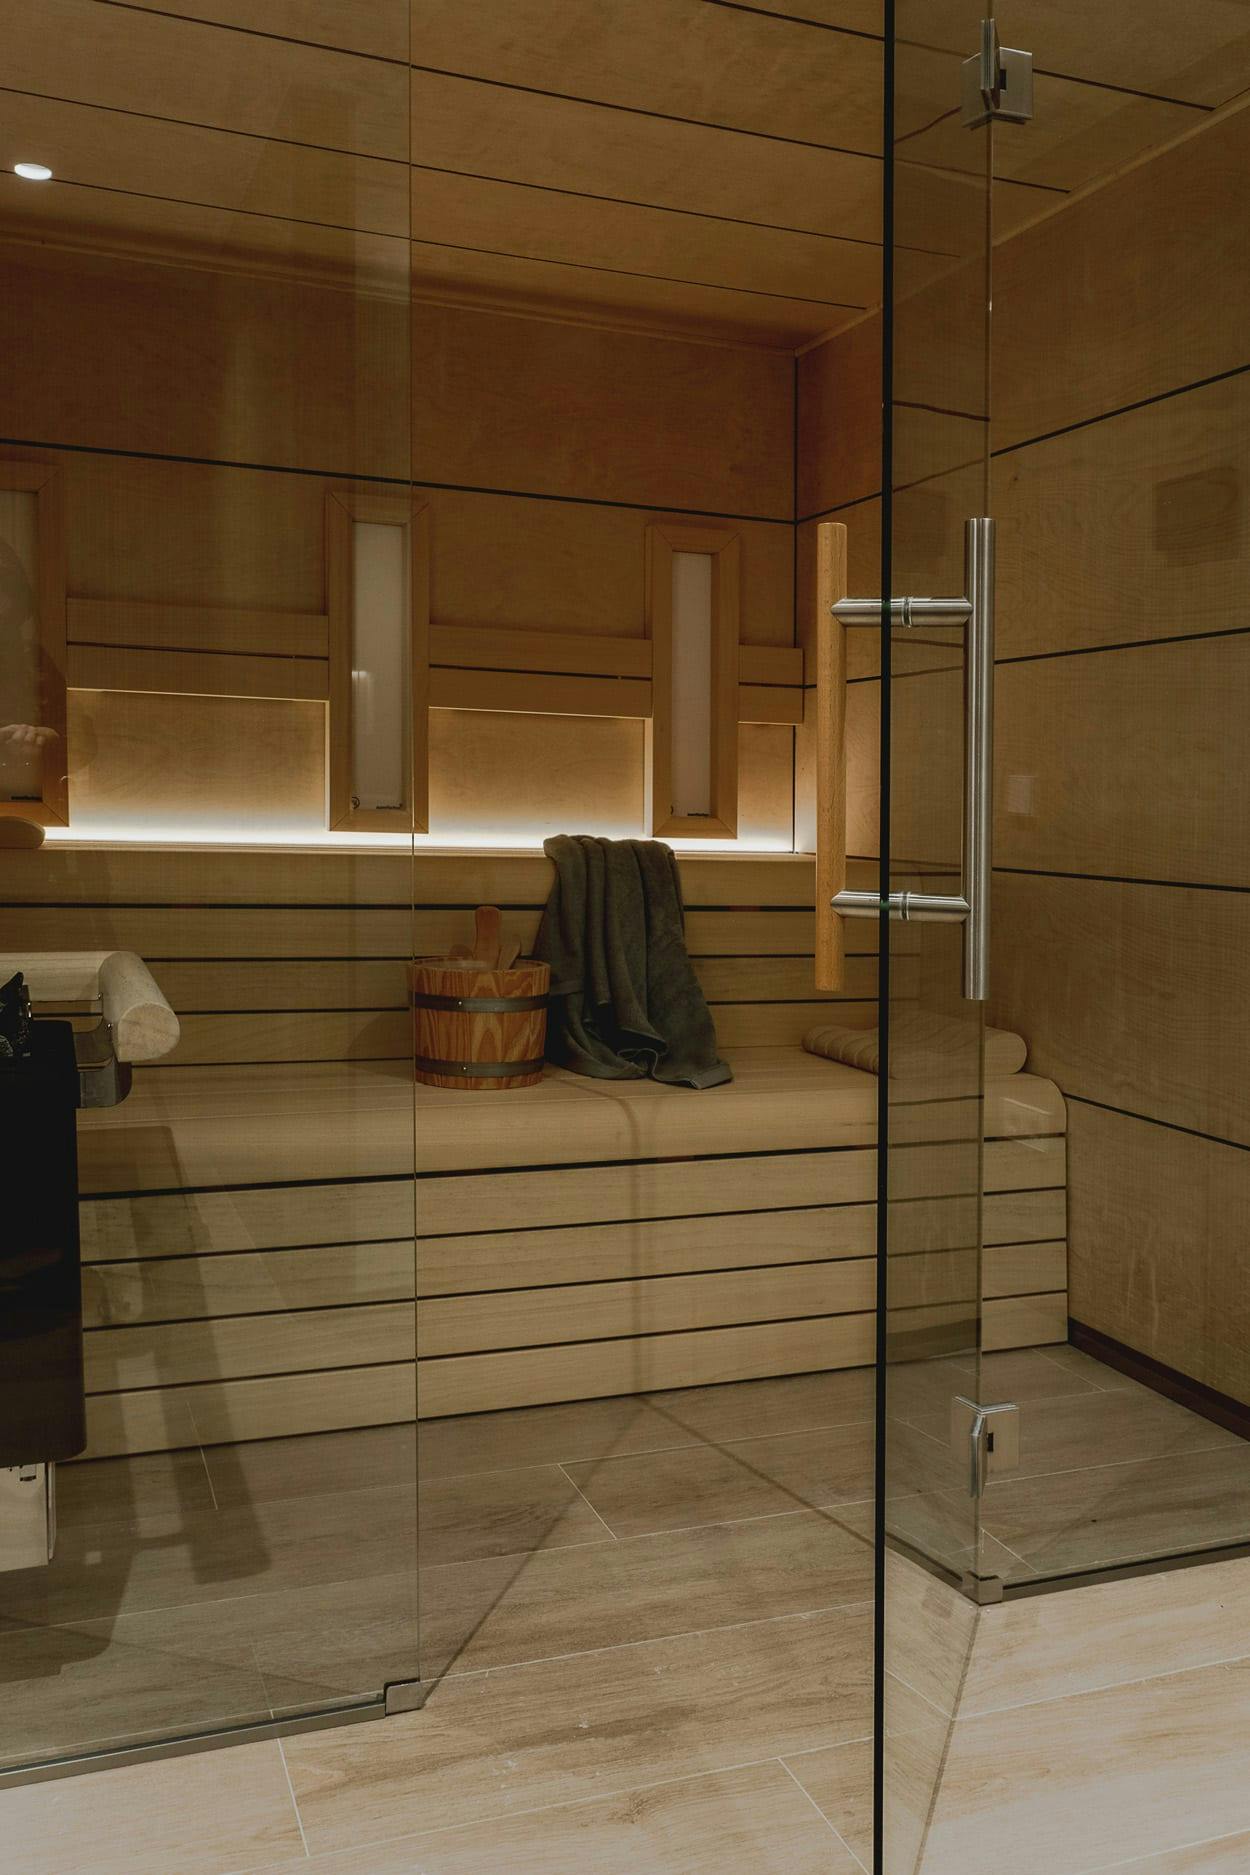 The image features a large, modern bathroom with a glass shower stall, a toilet, and a sink. The bathroom is well-lit and has a variety of towels and a handbag placed on the floor.